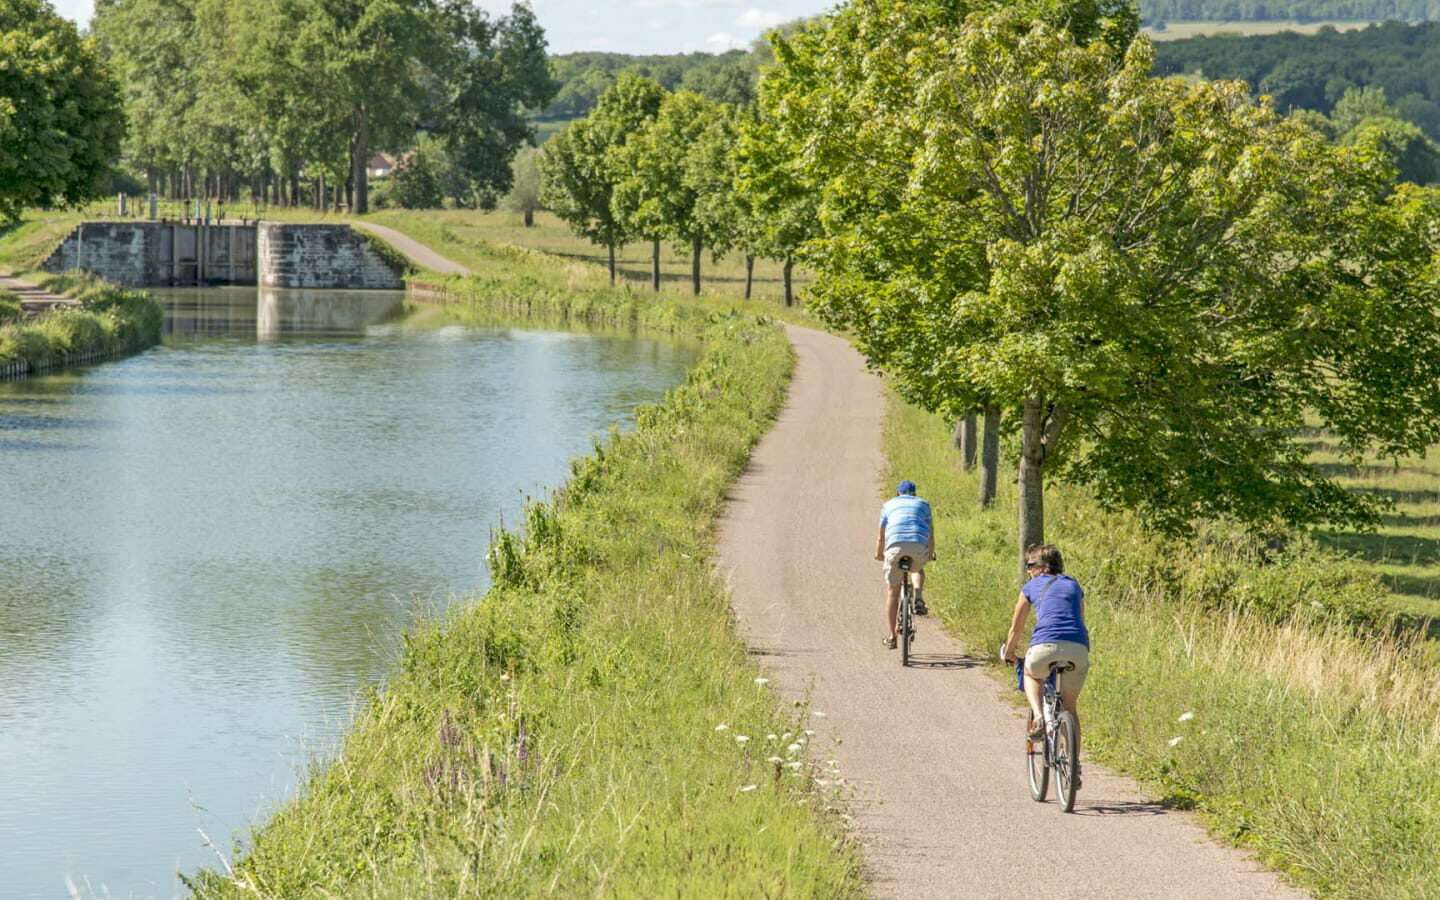 itineraire velo le long dun canal bourgogne 1600x900 1 edited Feexti